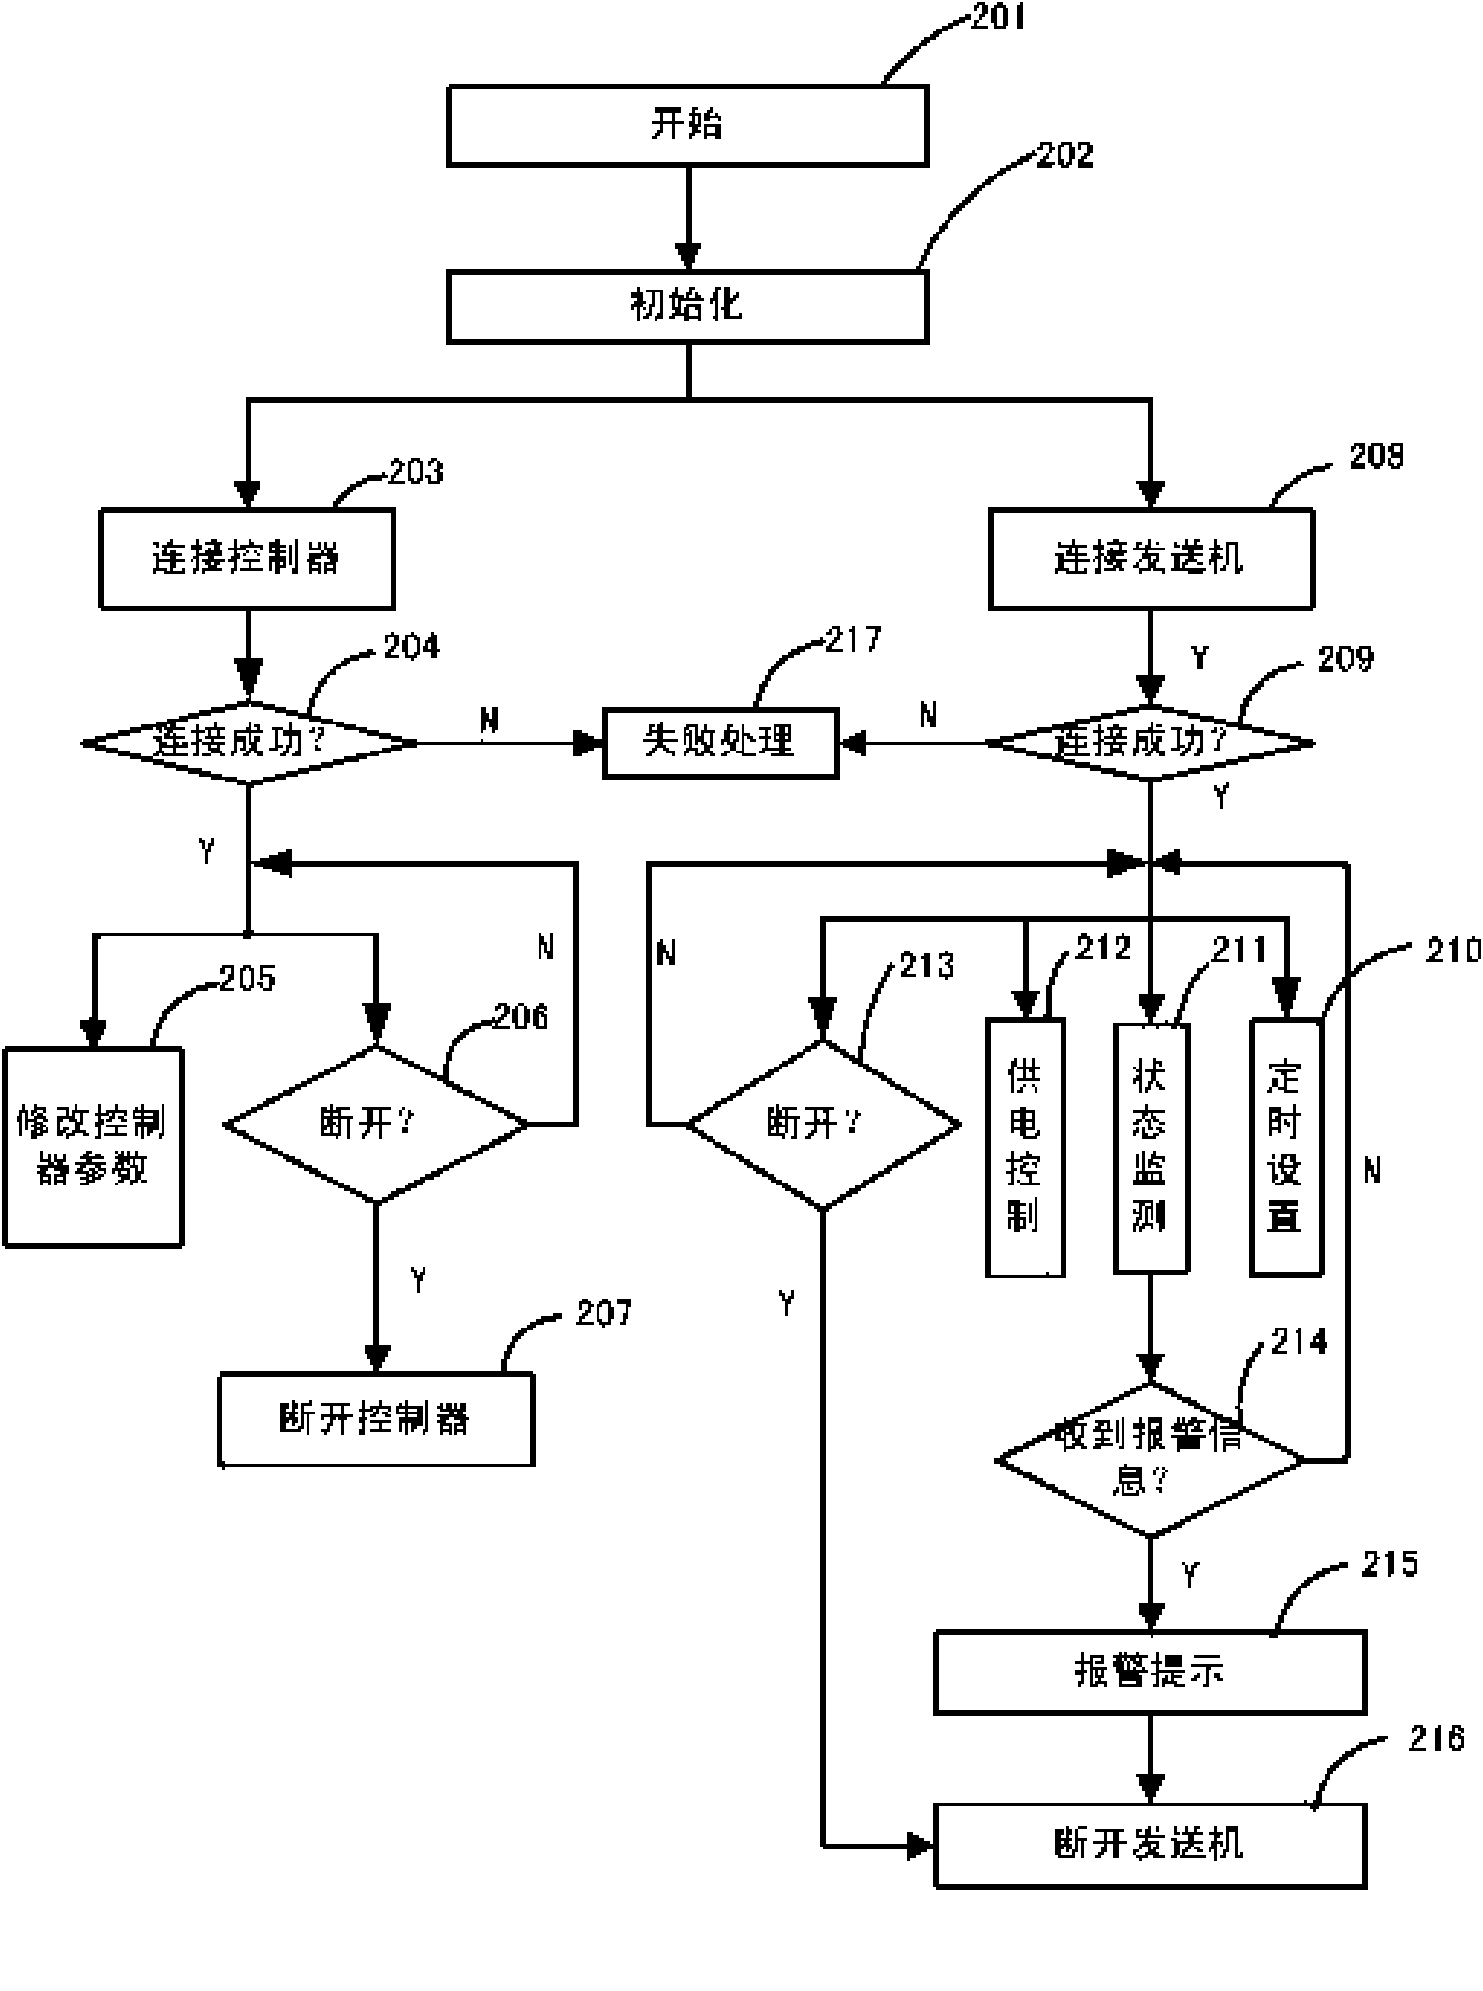 GPRS-based remote measuring and controlling system of multi-frequency induced polarization instrument